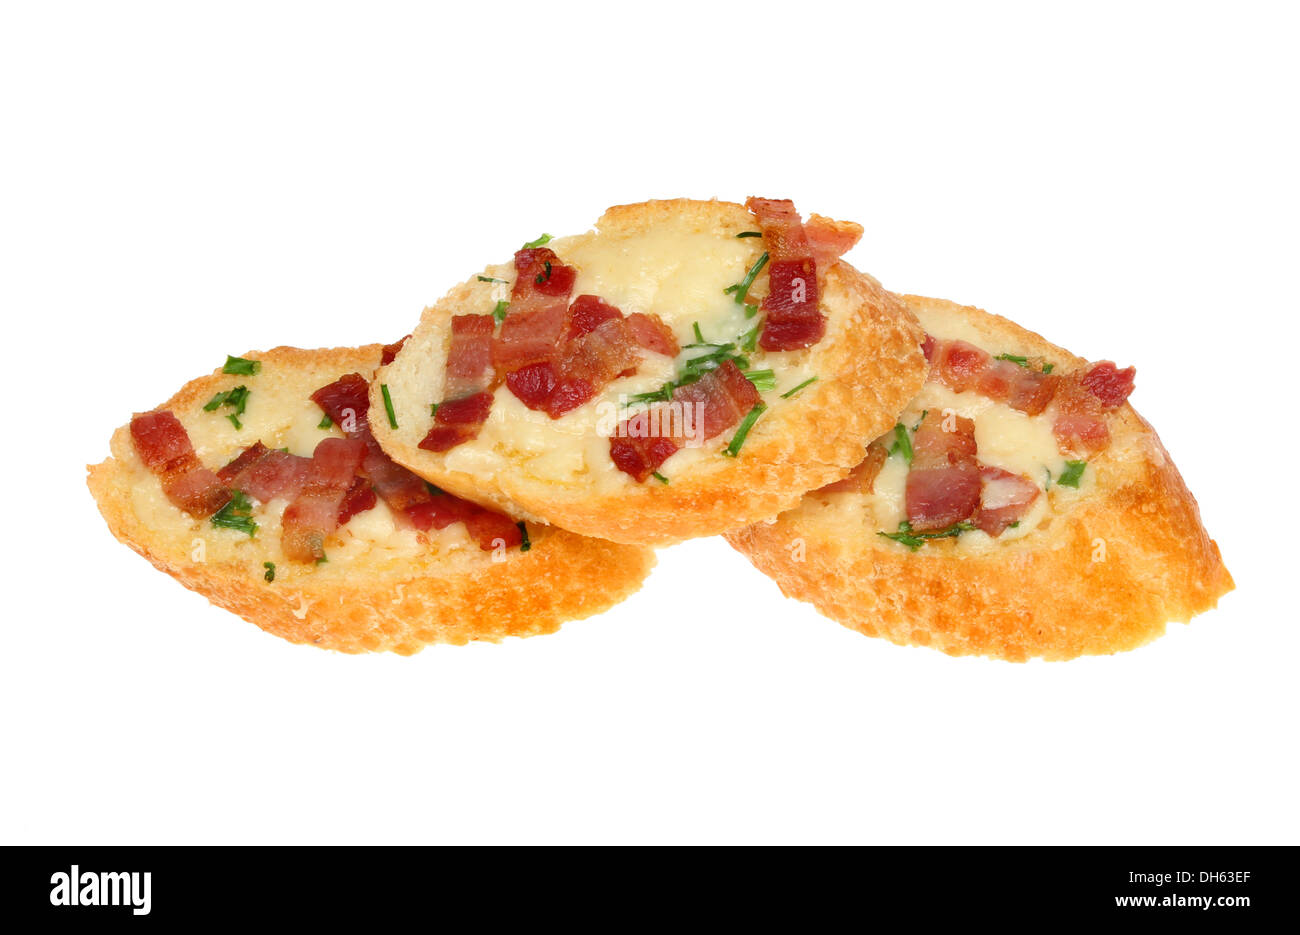 Savory cheese toasted cheese snack isolated against white Stock Photo